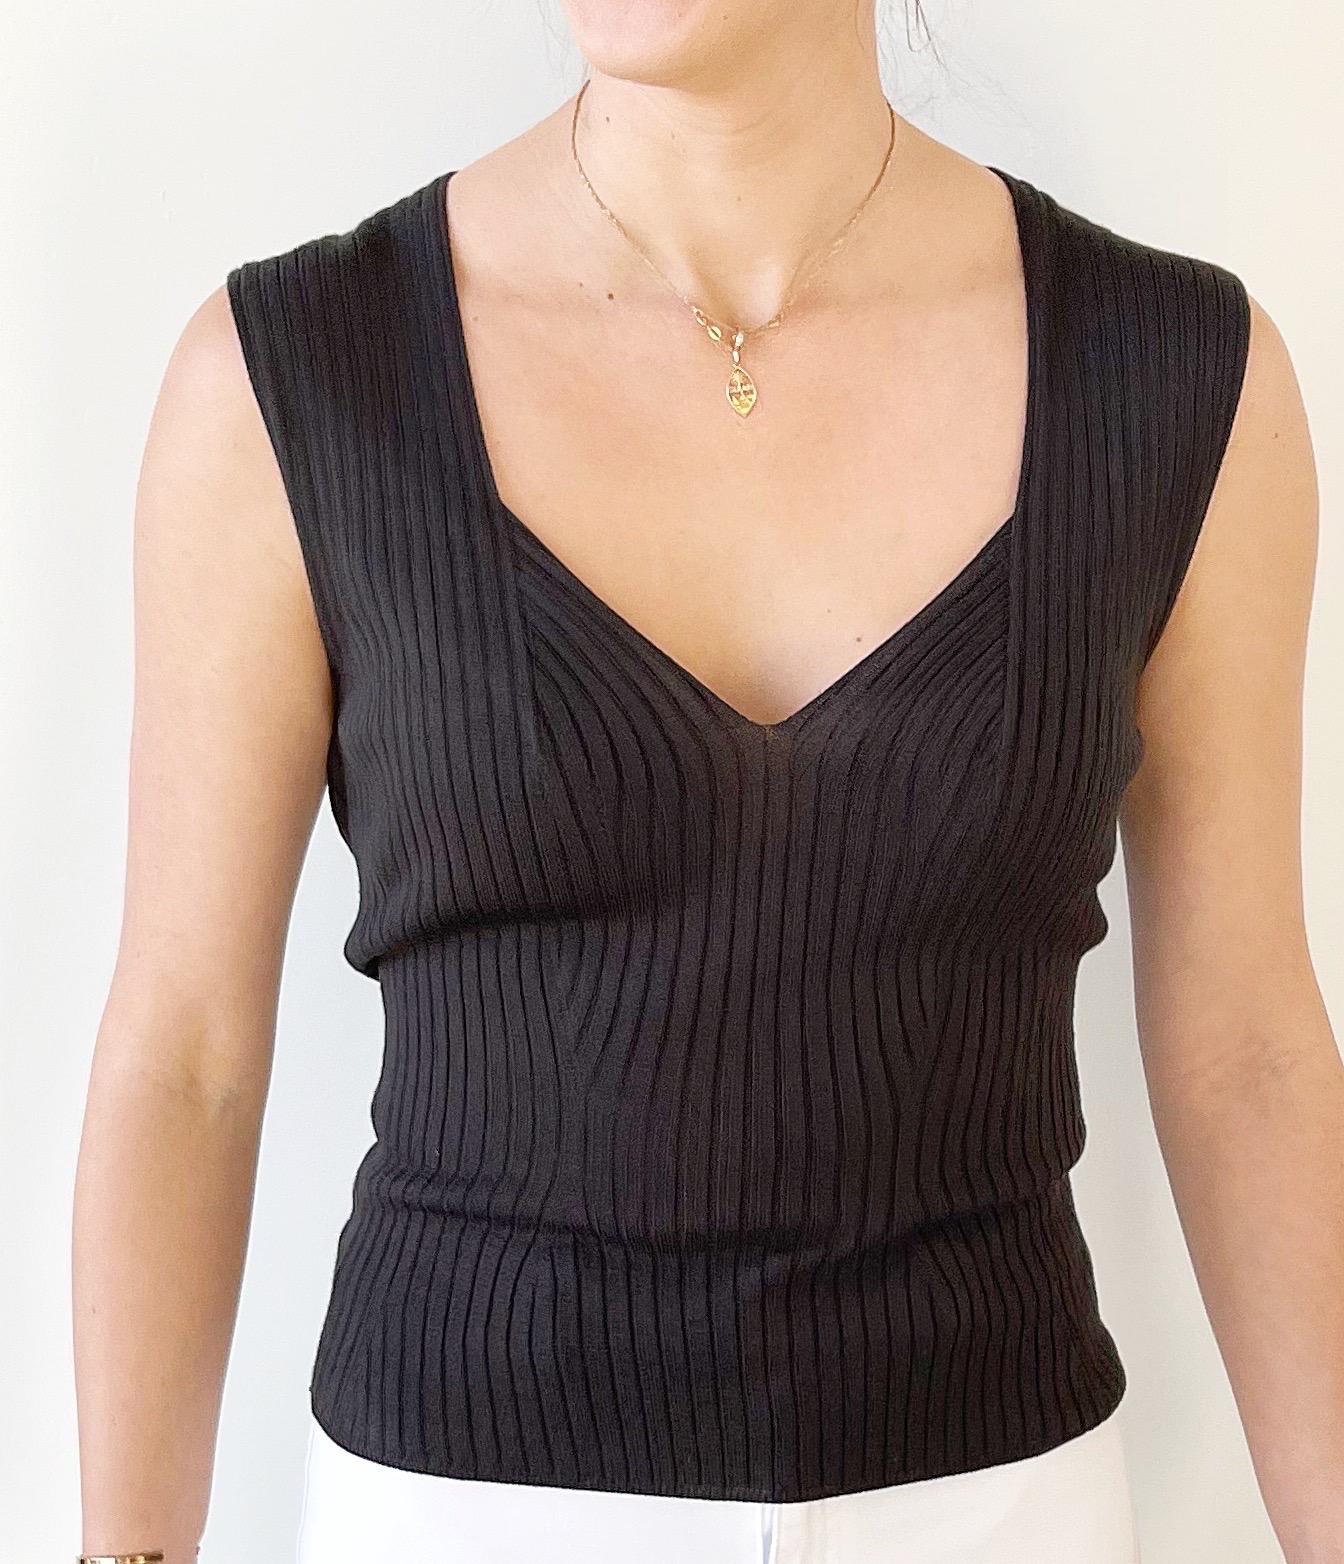 Yves Saint Laurent by Tom Ford Spring 2003 Brown Ribbed Sleeveless Vintage Top For Sale 1